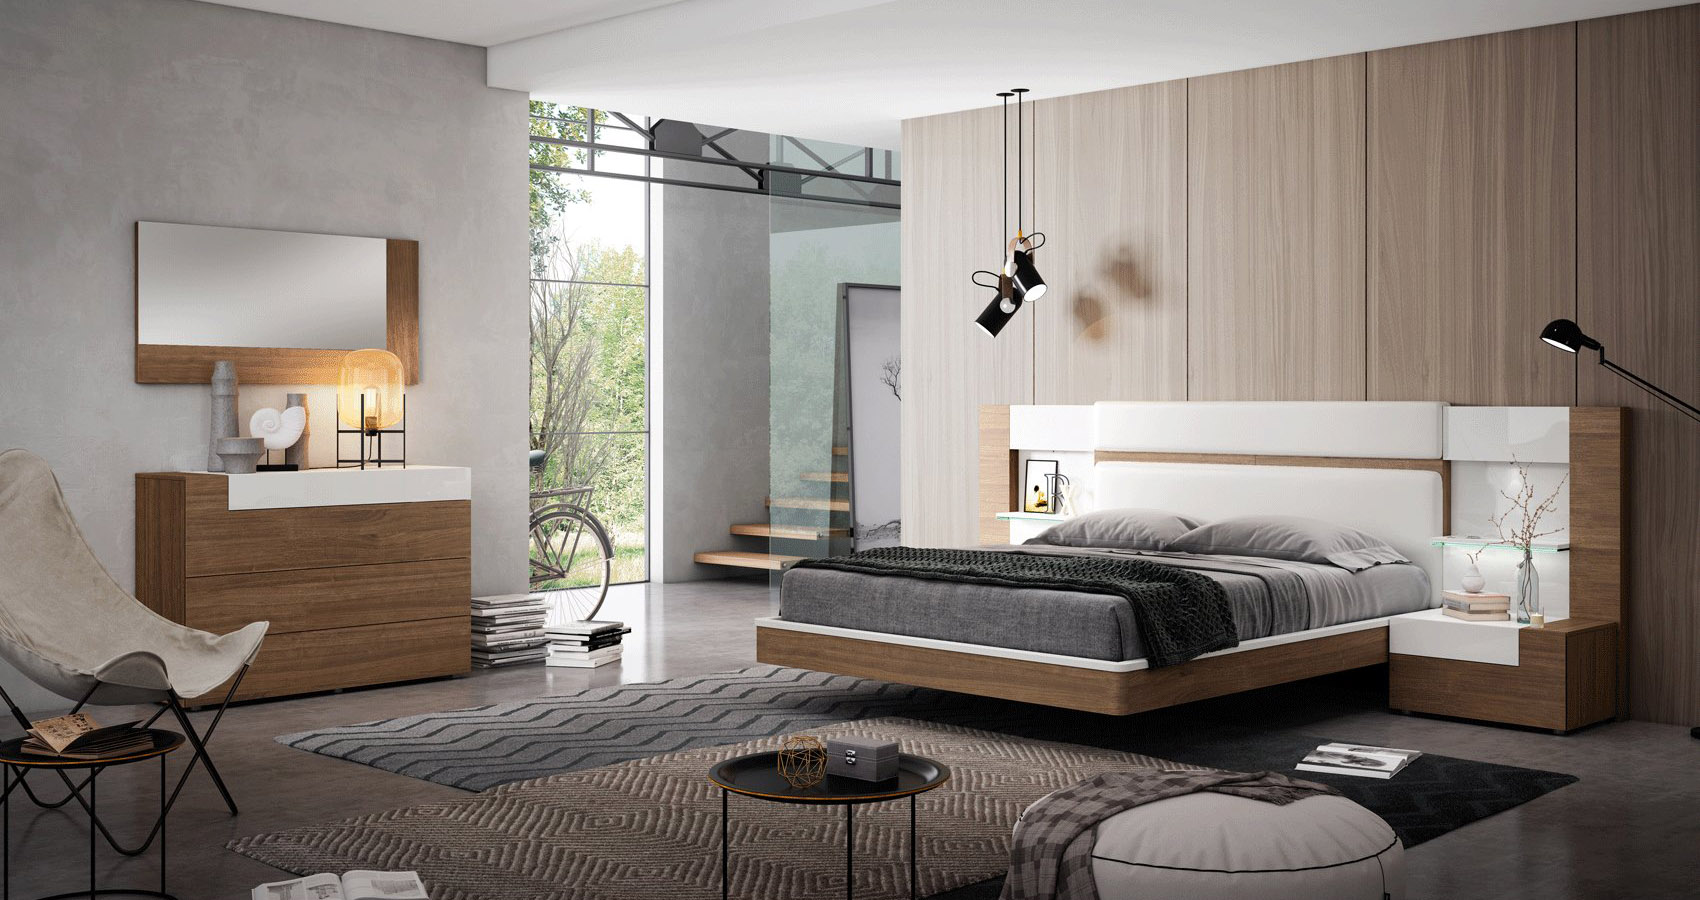 The main modern bedrooms